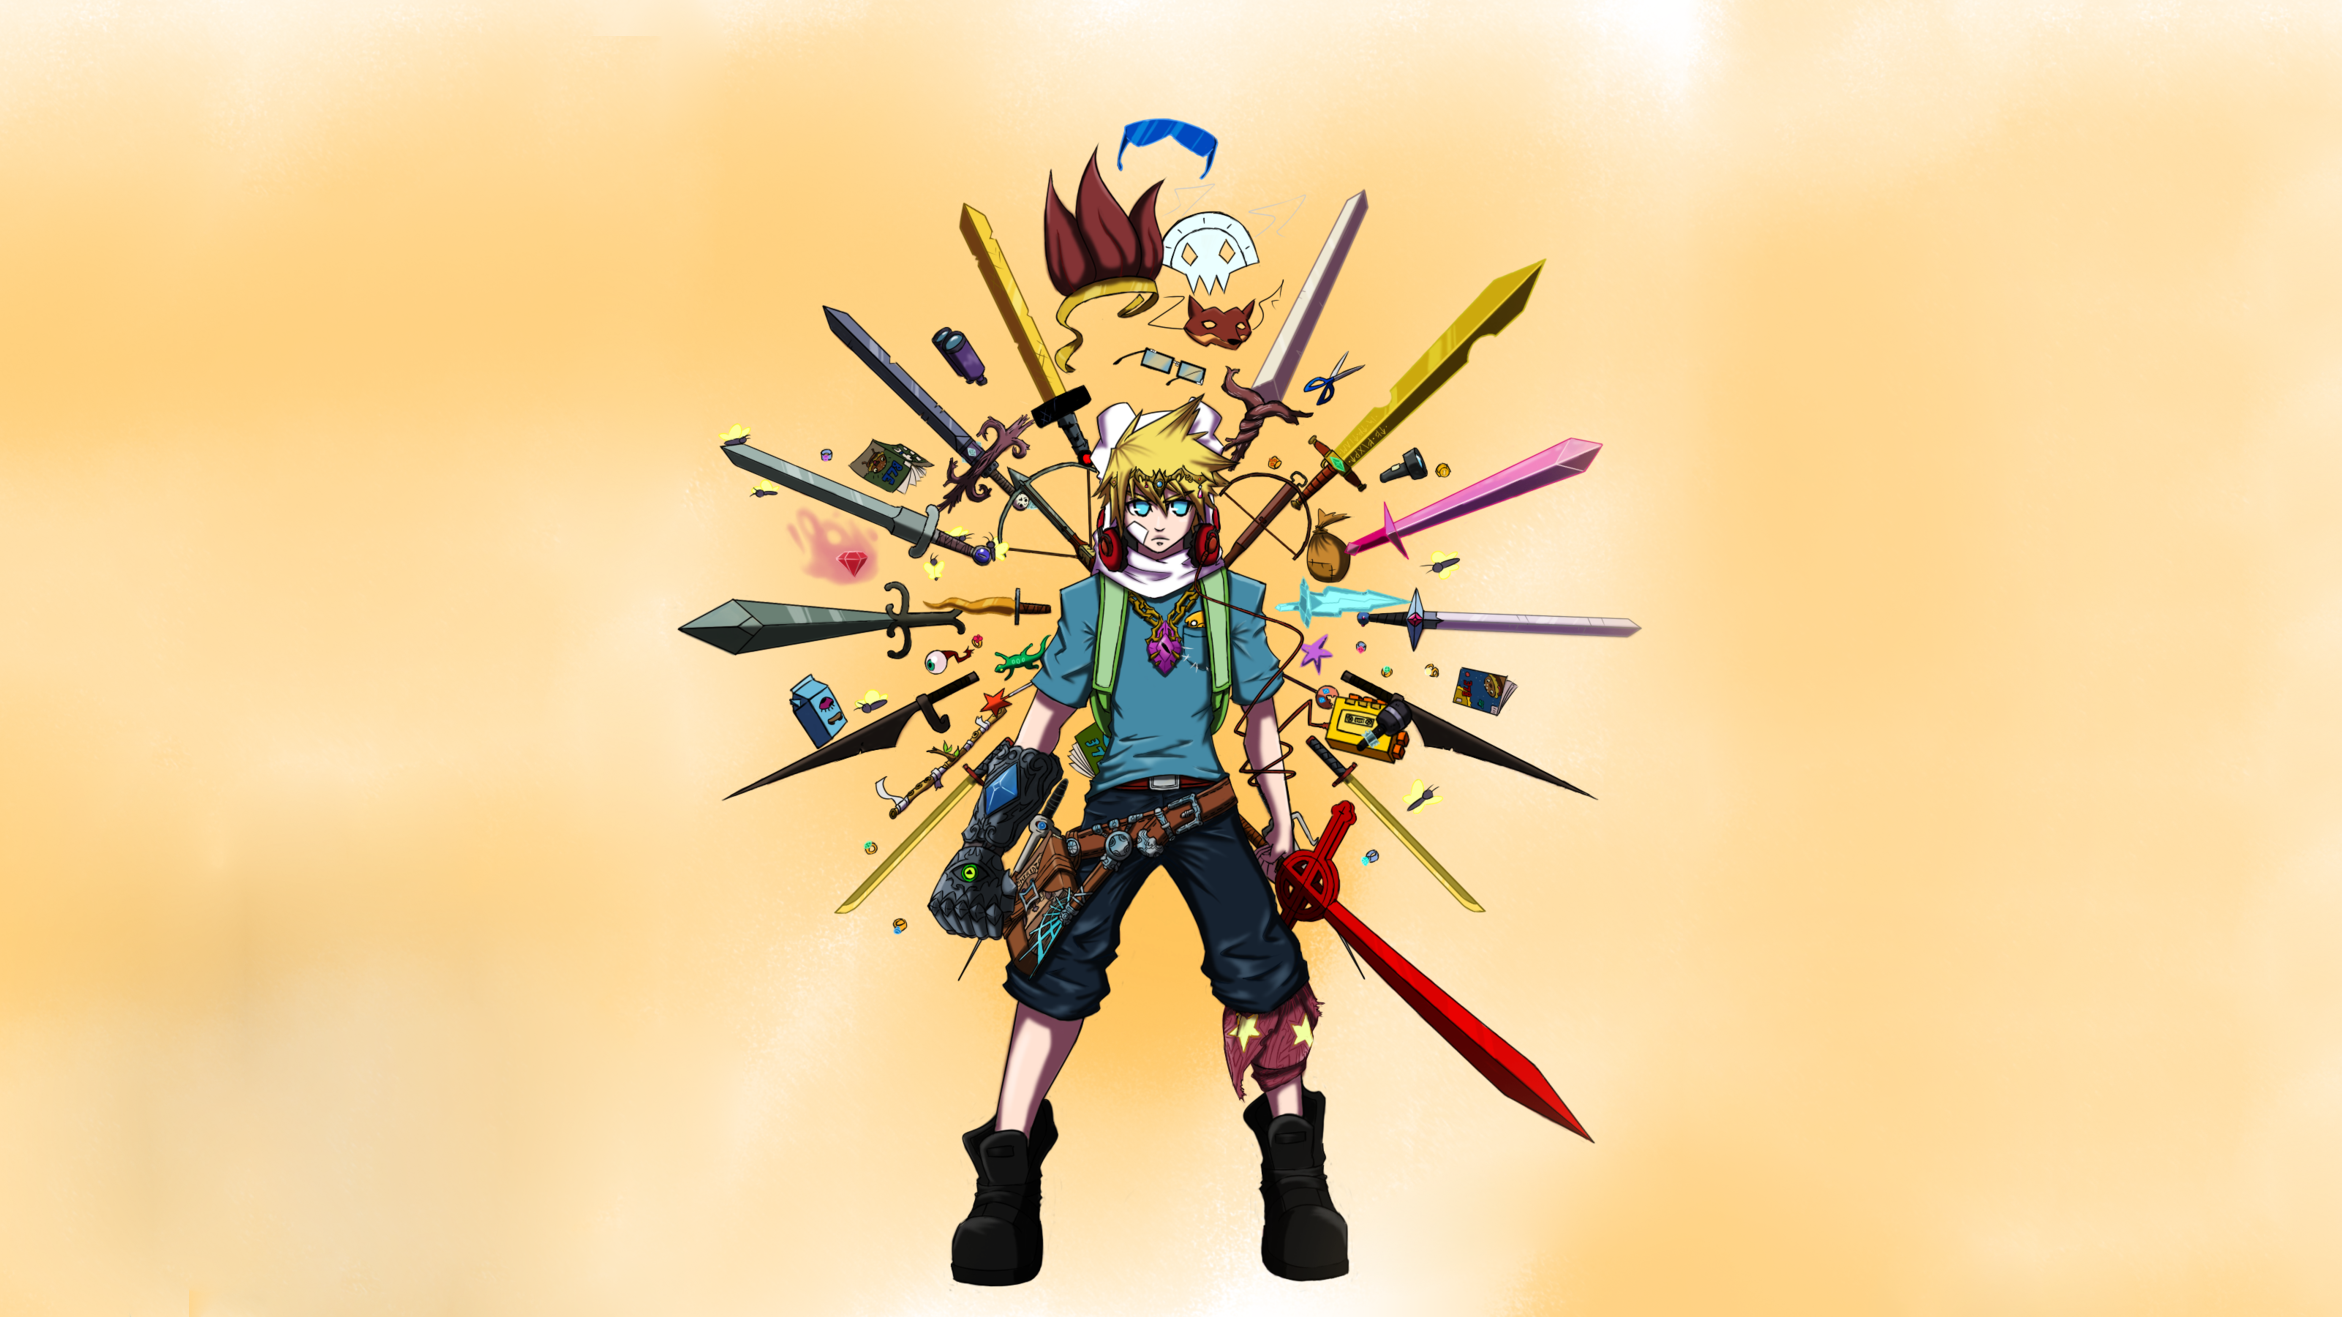 adventure time wallpaper,anime,graphic design,fictional character,animation,illustration